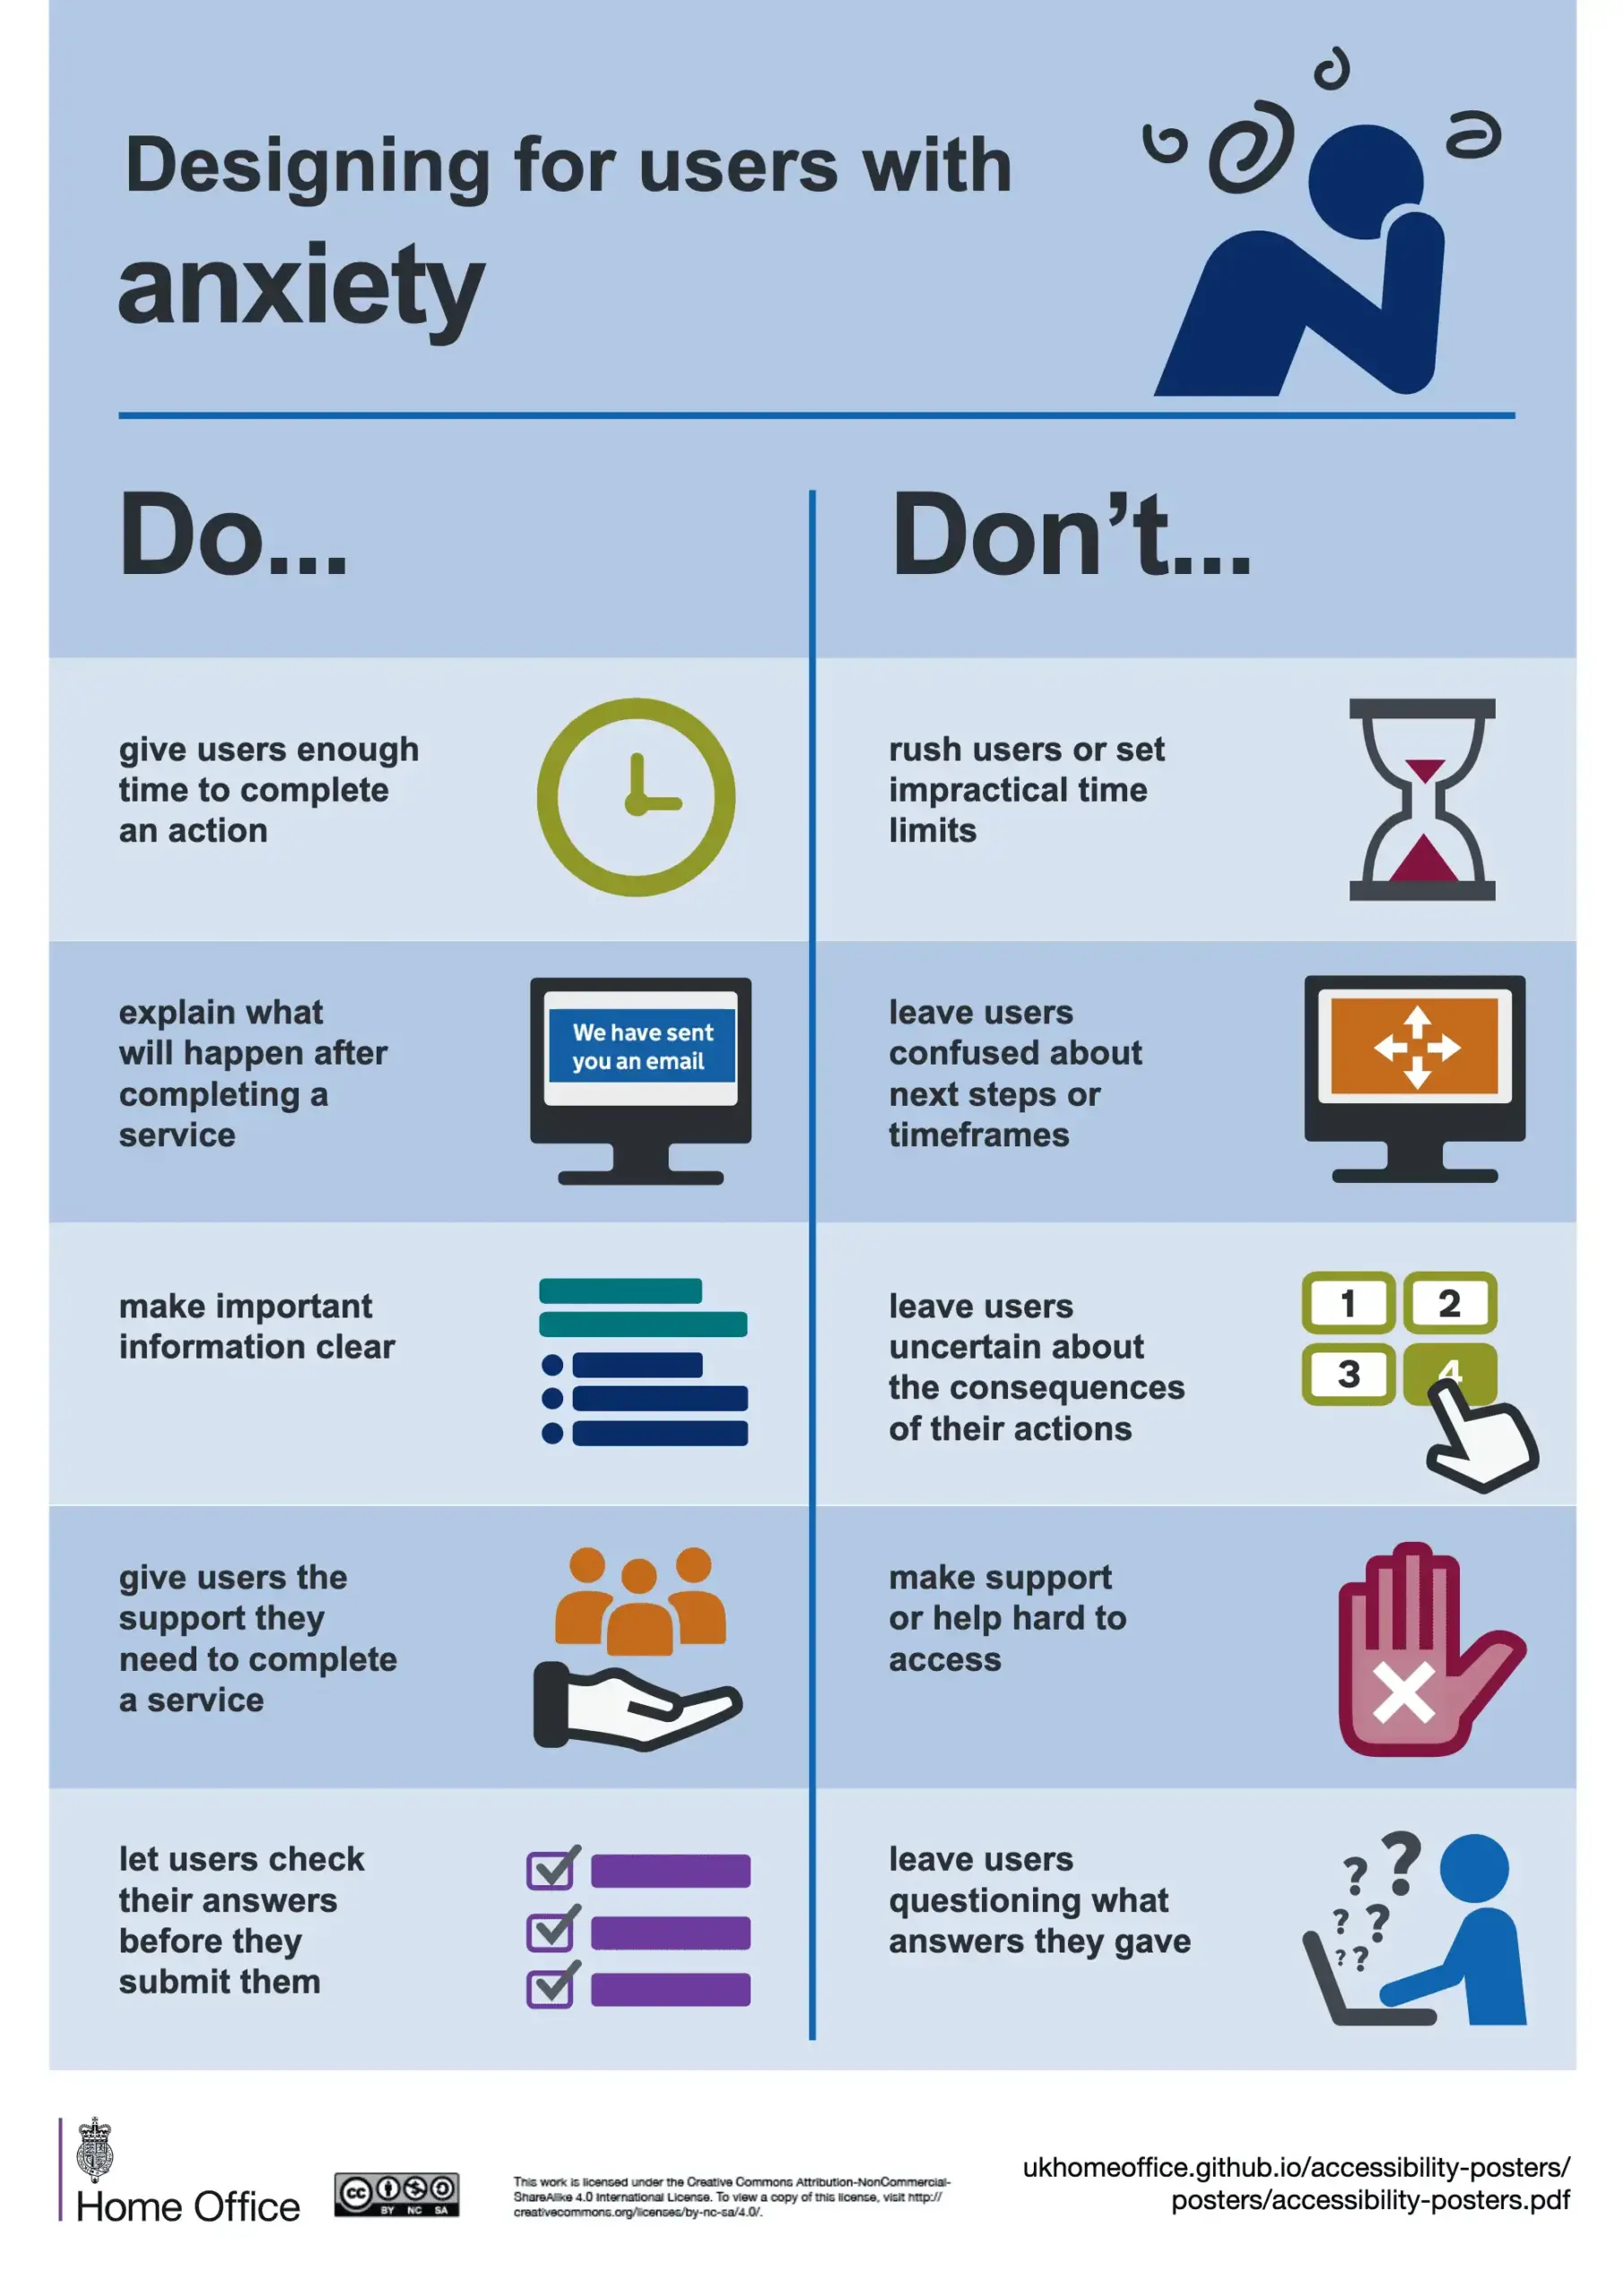 Designing for users with anxiety poster from the UK Home Office. A list of dos and don'ts. 